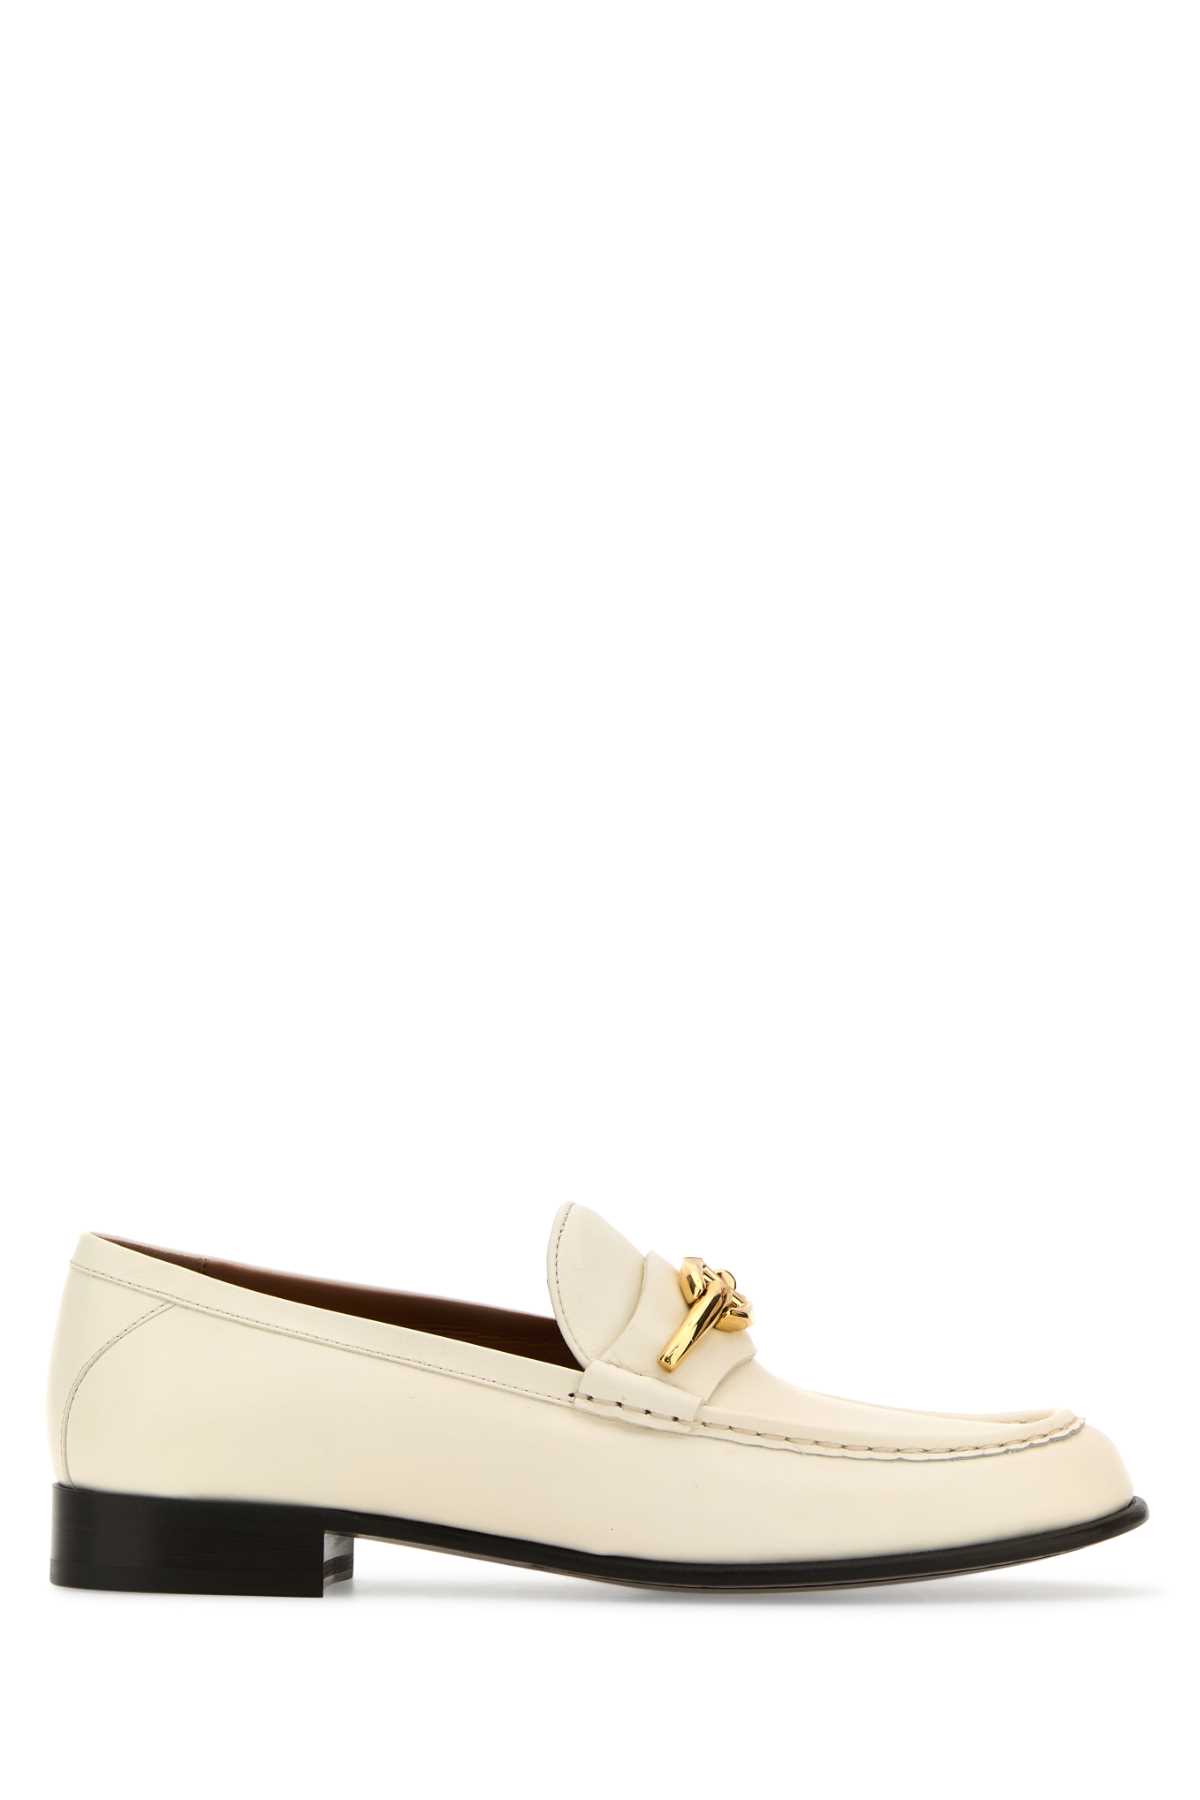 Shop Valentino Ivory Leather Vlogo The Bold Edition Loafers